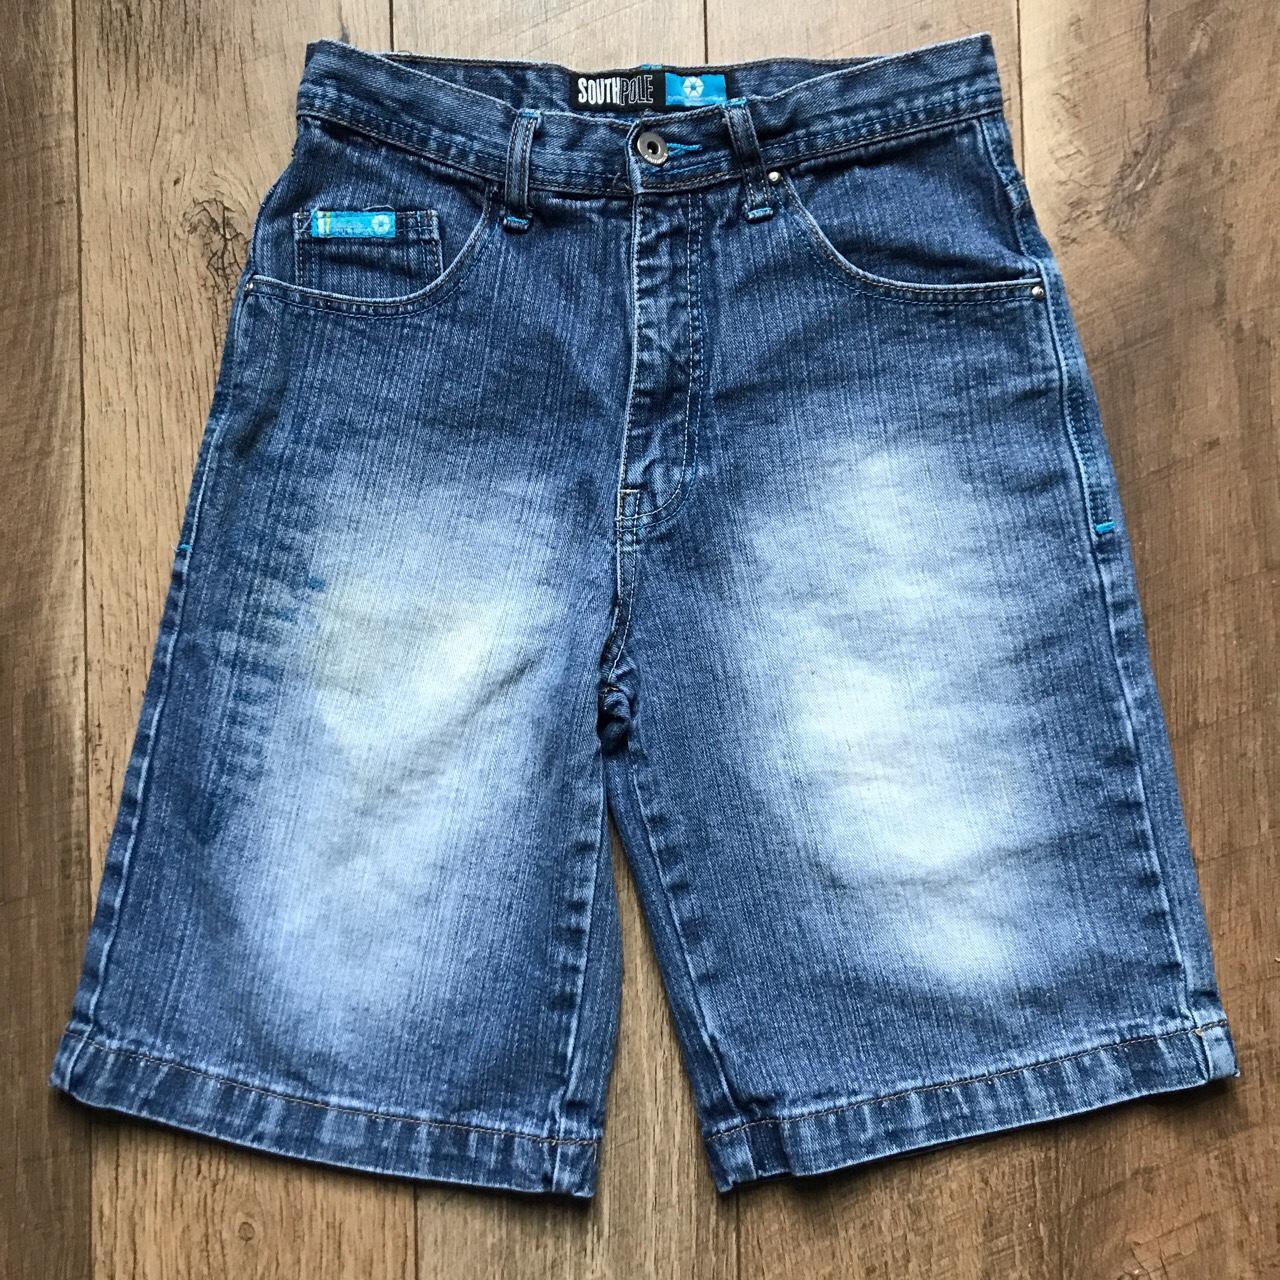 Y2k southpole jorts with faded design Some super... - Depop